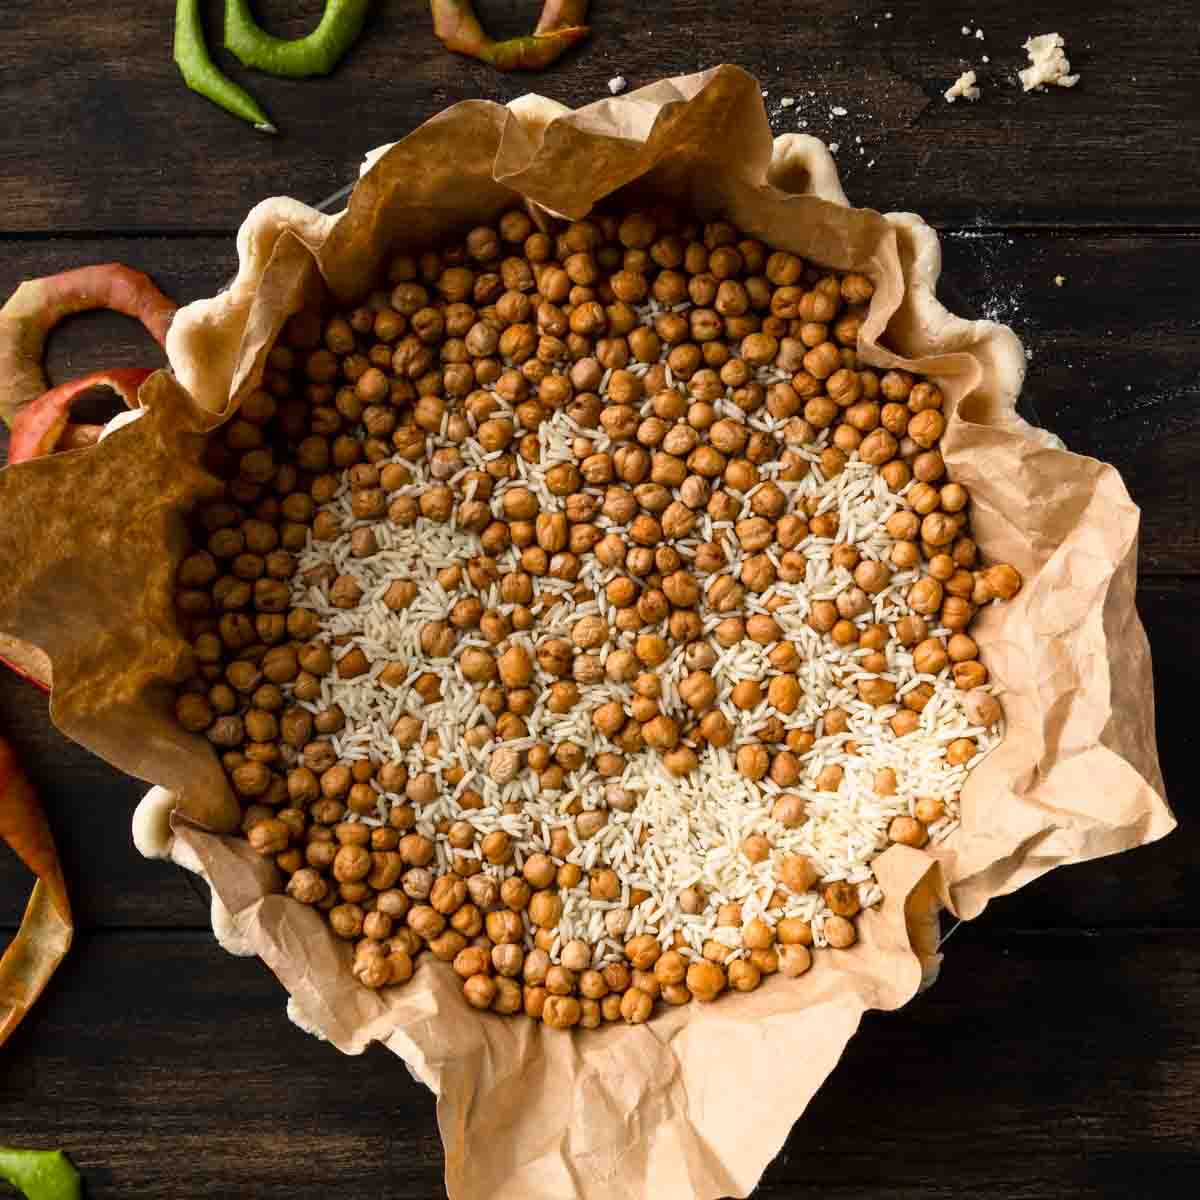 A raw pie crust lined with a coffee filter and filled with dried chickpeas and rice